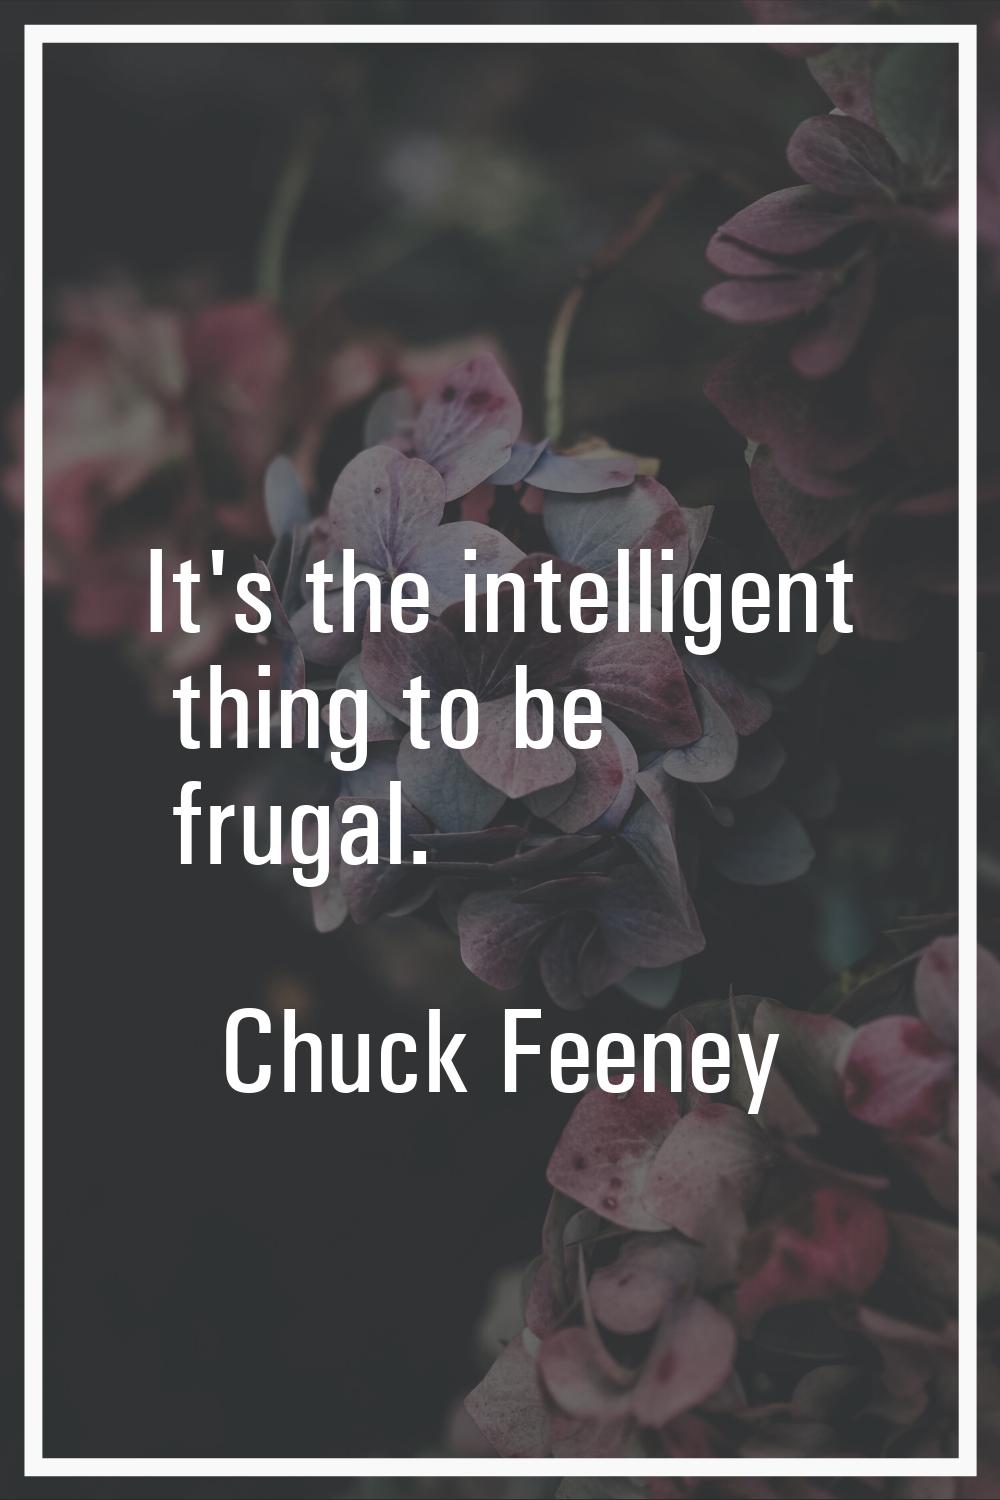 It's the intelligent thing to be frugal.